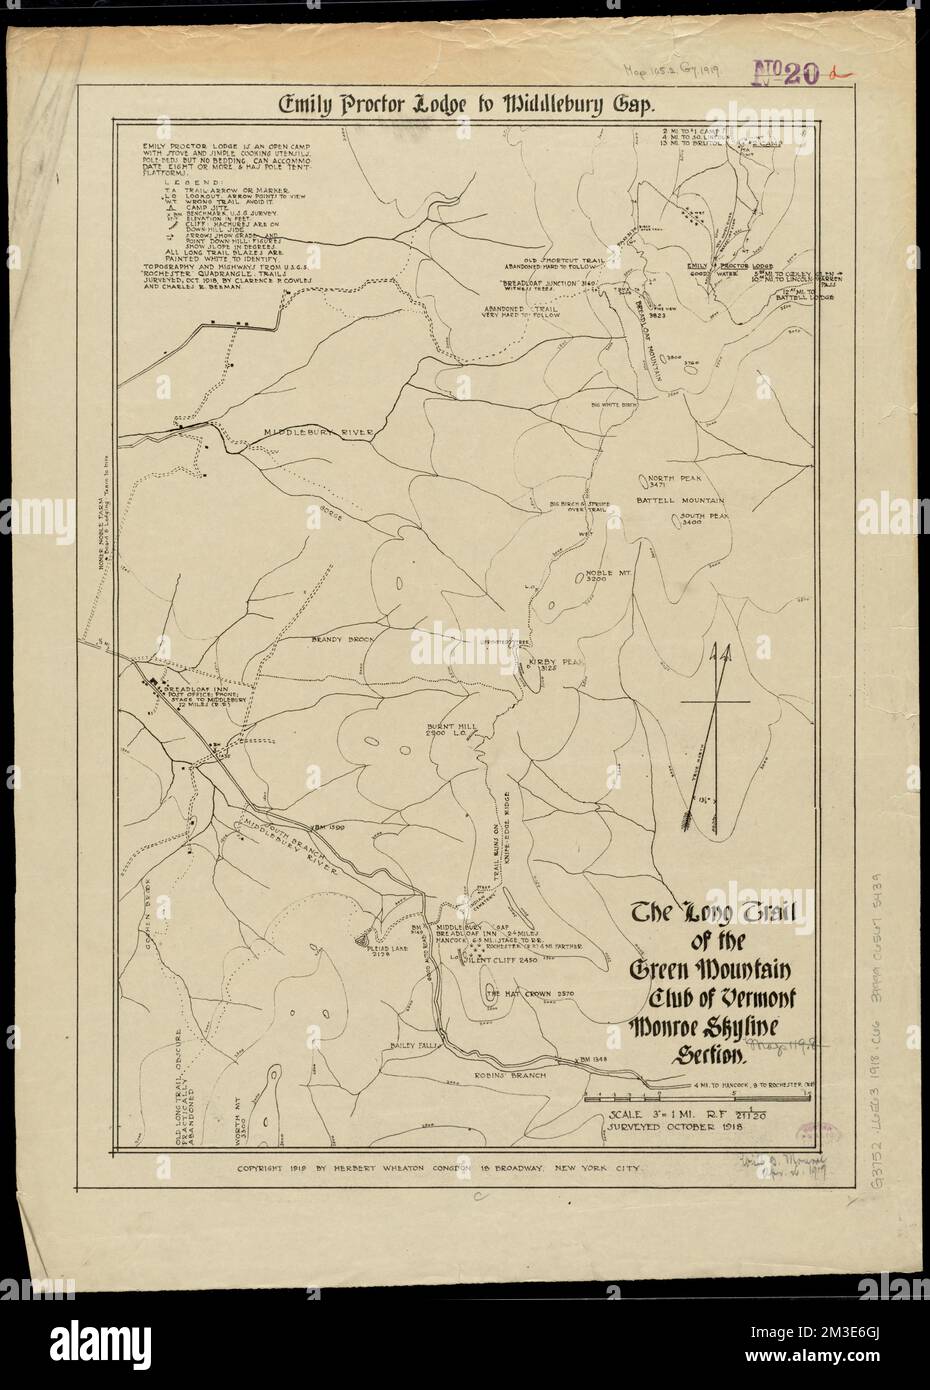 The Long Trail of the Green Mountain Club : Monroe Skyline Section : Emily Proctor Lodge to Middlebury Gap , Trails, Vermont, Maps, Hiking, Vermont, Maps, Long Trail Vt., Maps Norman B. Leventhal Map Center Collection Stock Photo